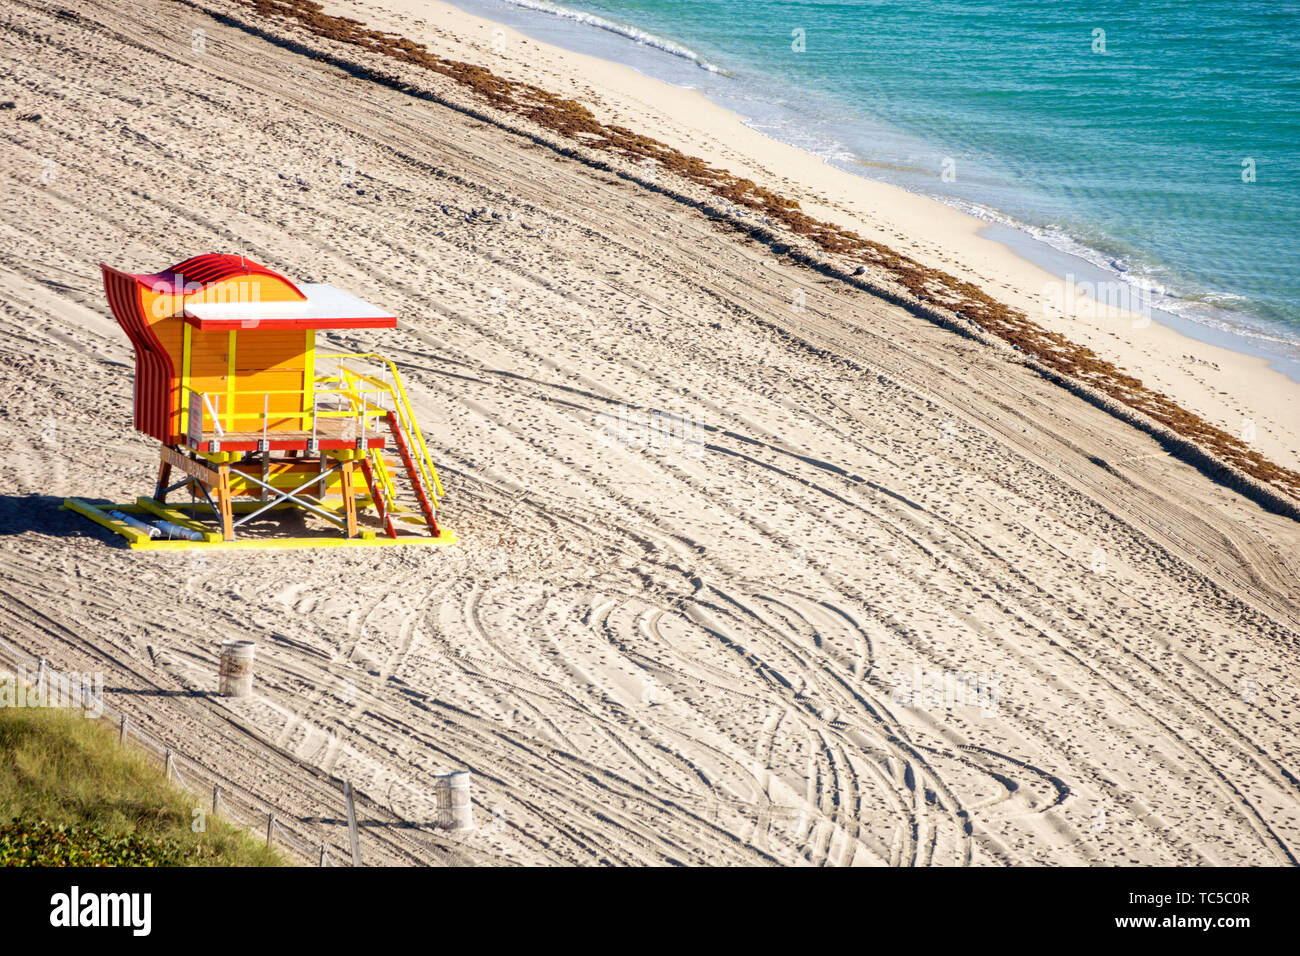 Miami Beach Florida,North Beach,North Shore Open Space Park,public beach sand,lifeguard station unattended unmanned,Atlantic Ocean,vehicle tire tracks Stock Photo